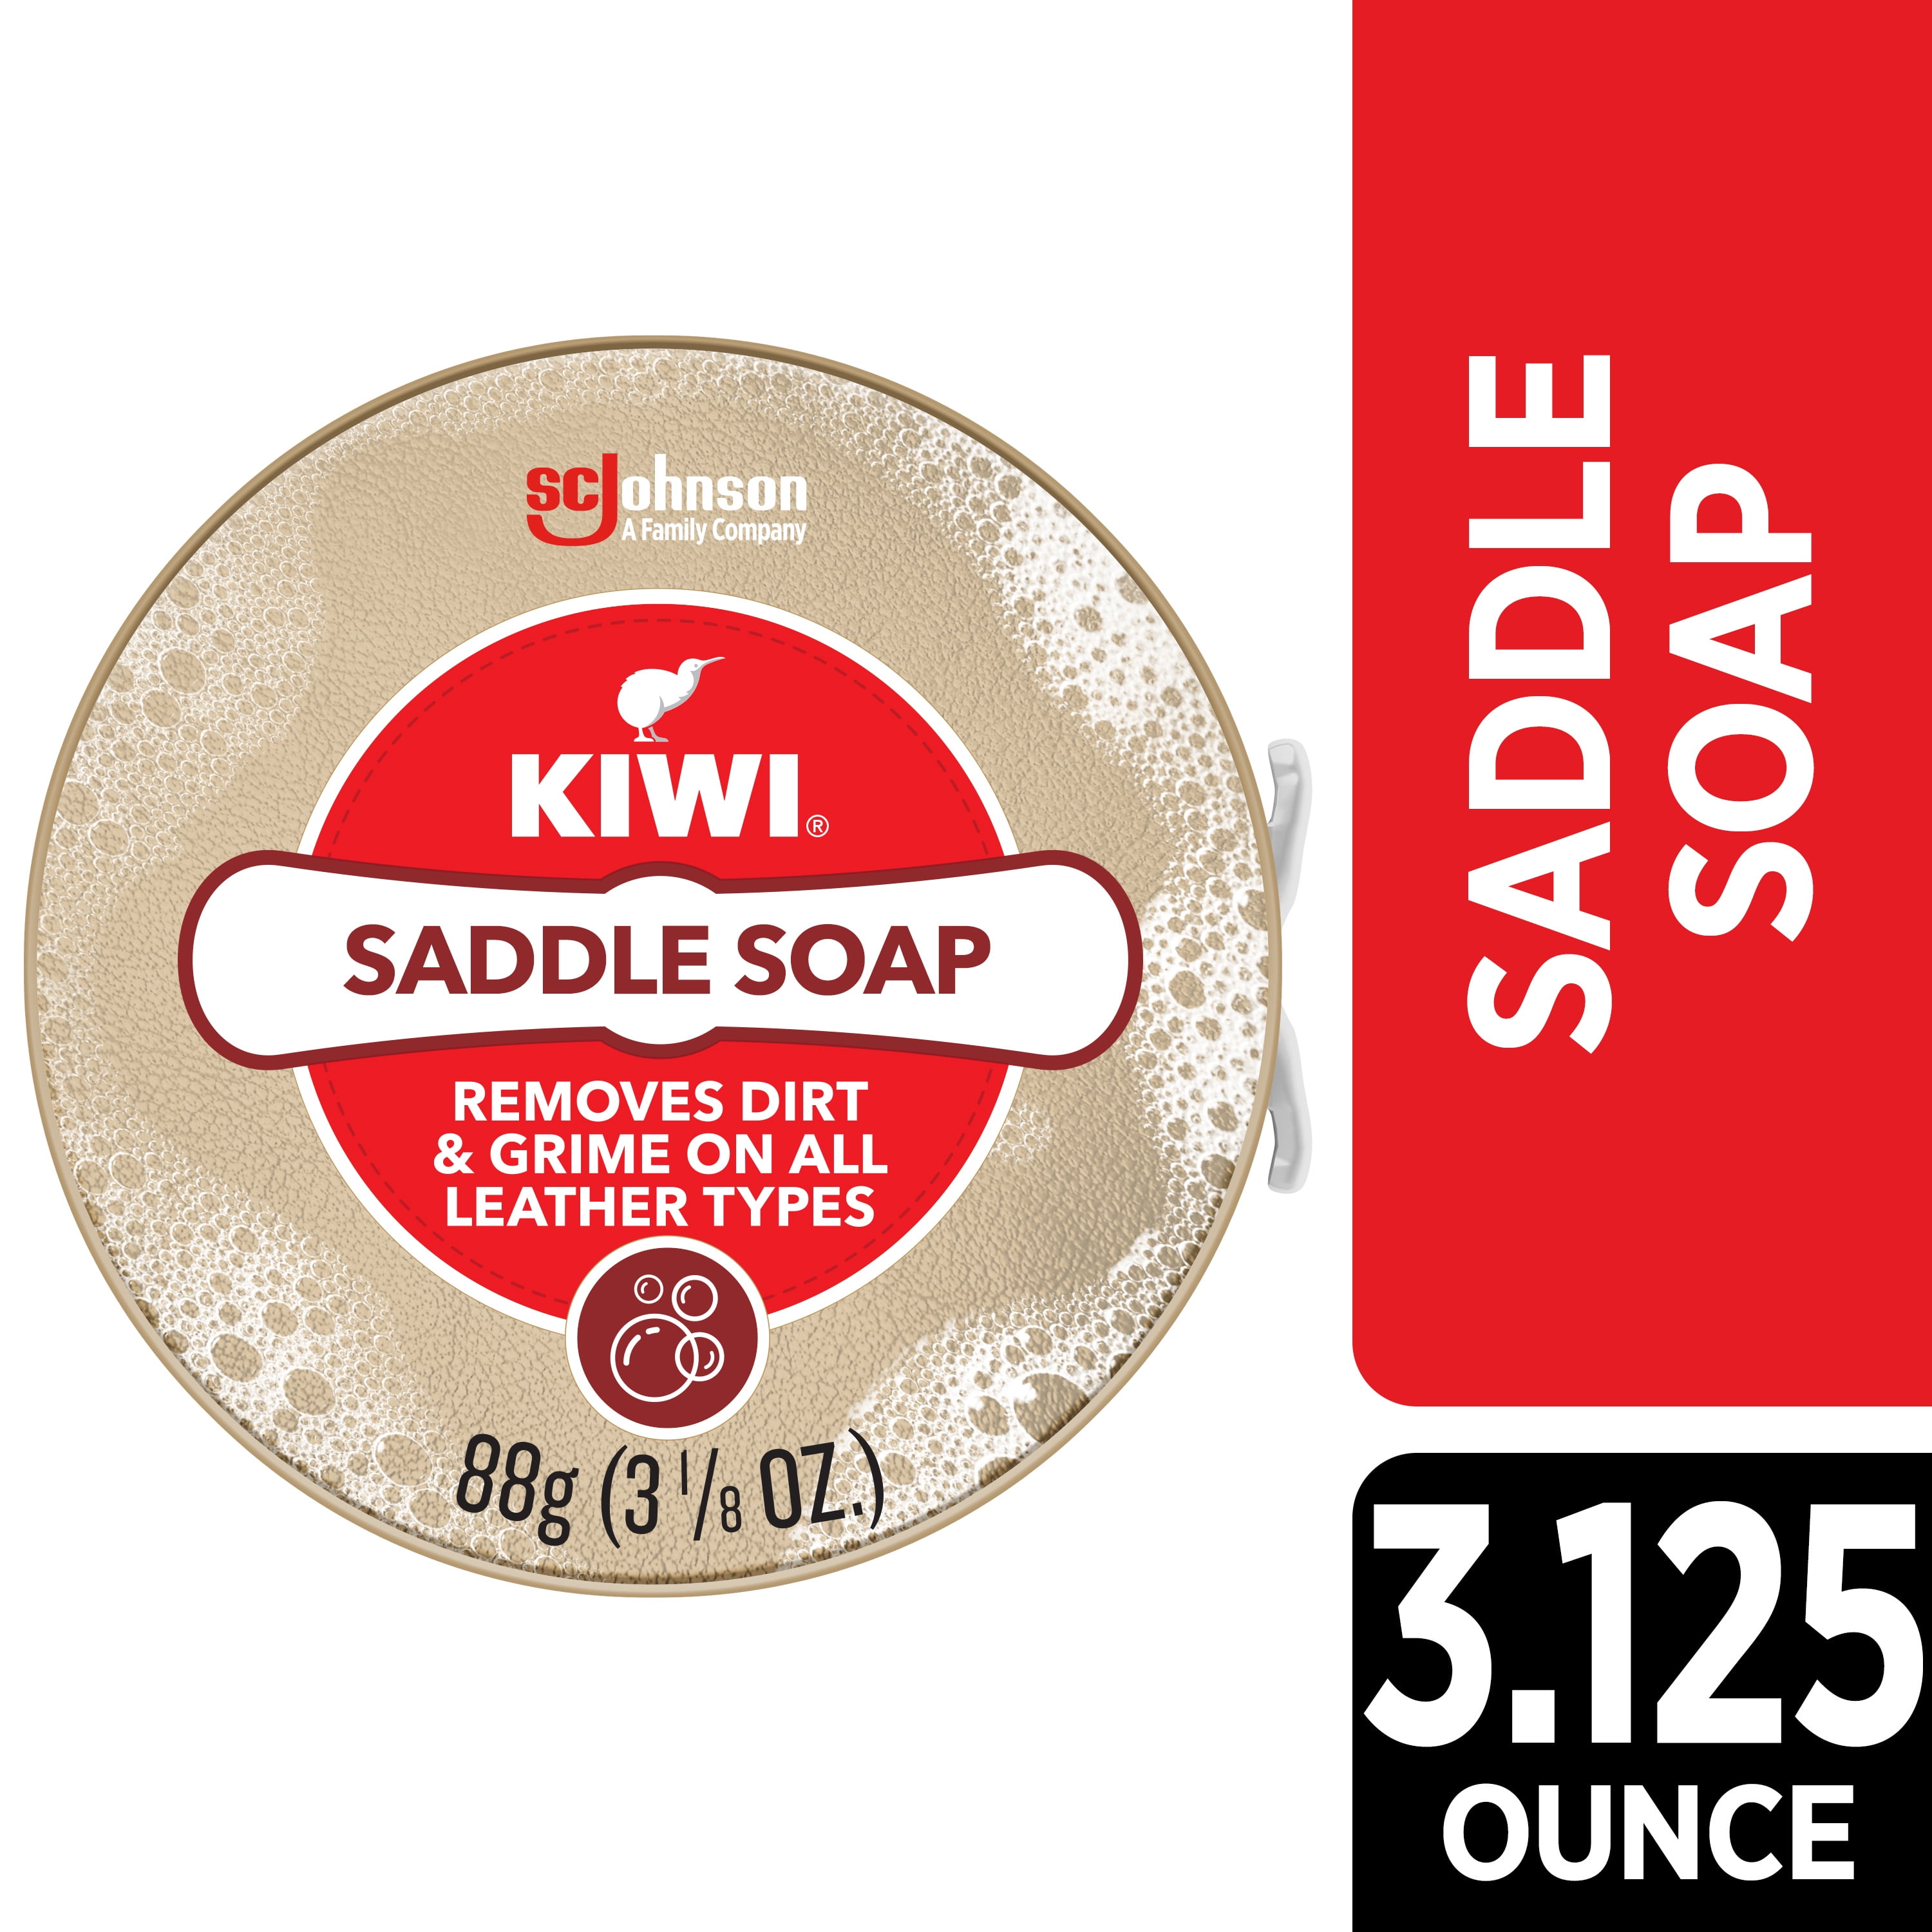 Kiwi Leather Outdoor Saddle Soap 3 125, Will Saddle Soap Remove Ink From Leather